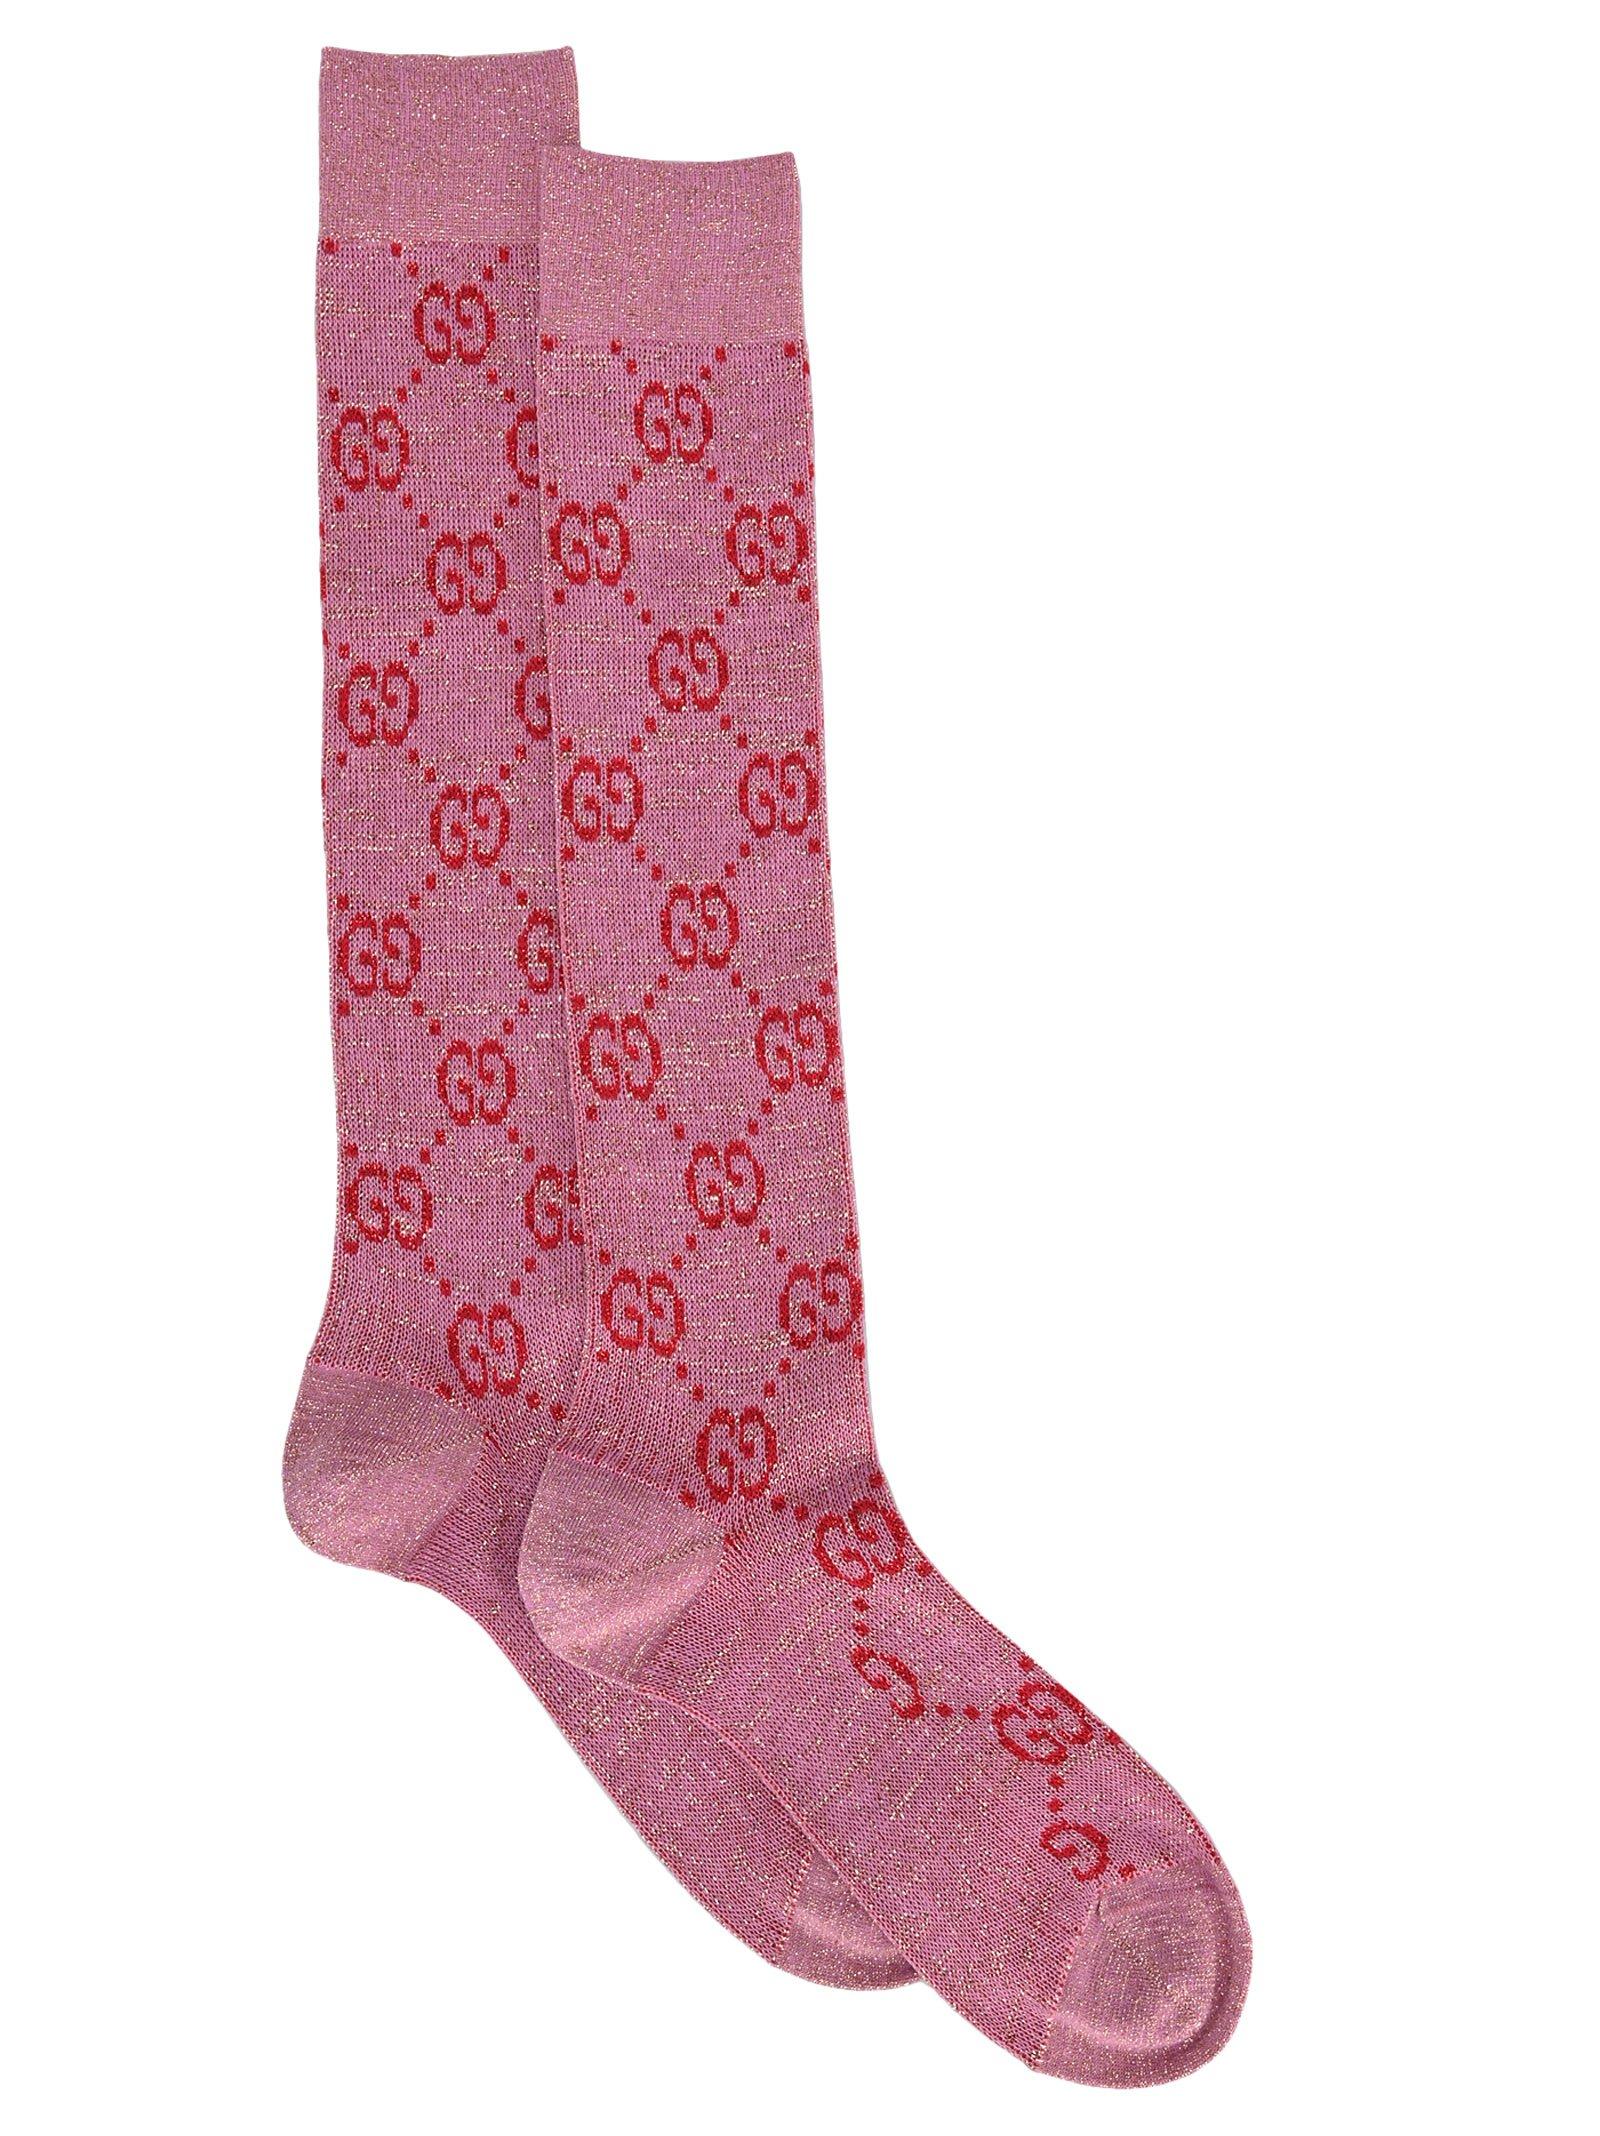 Gucci Cotton GG Signature Socks in Pink - Lyst